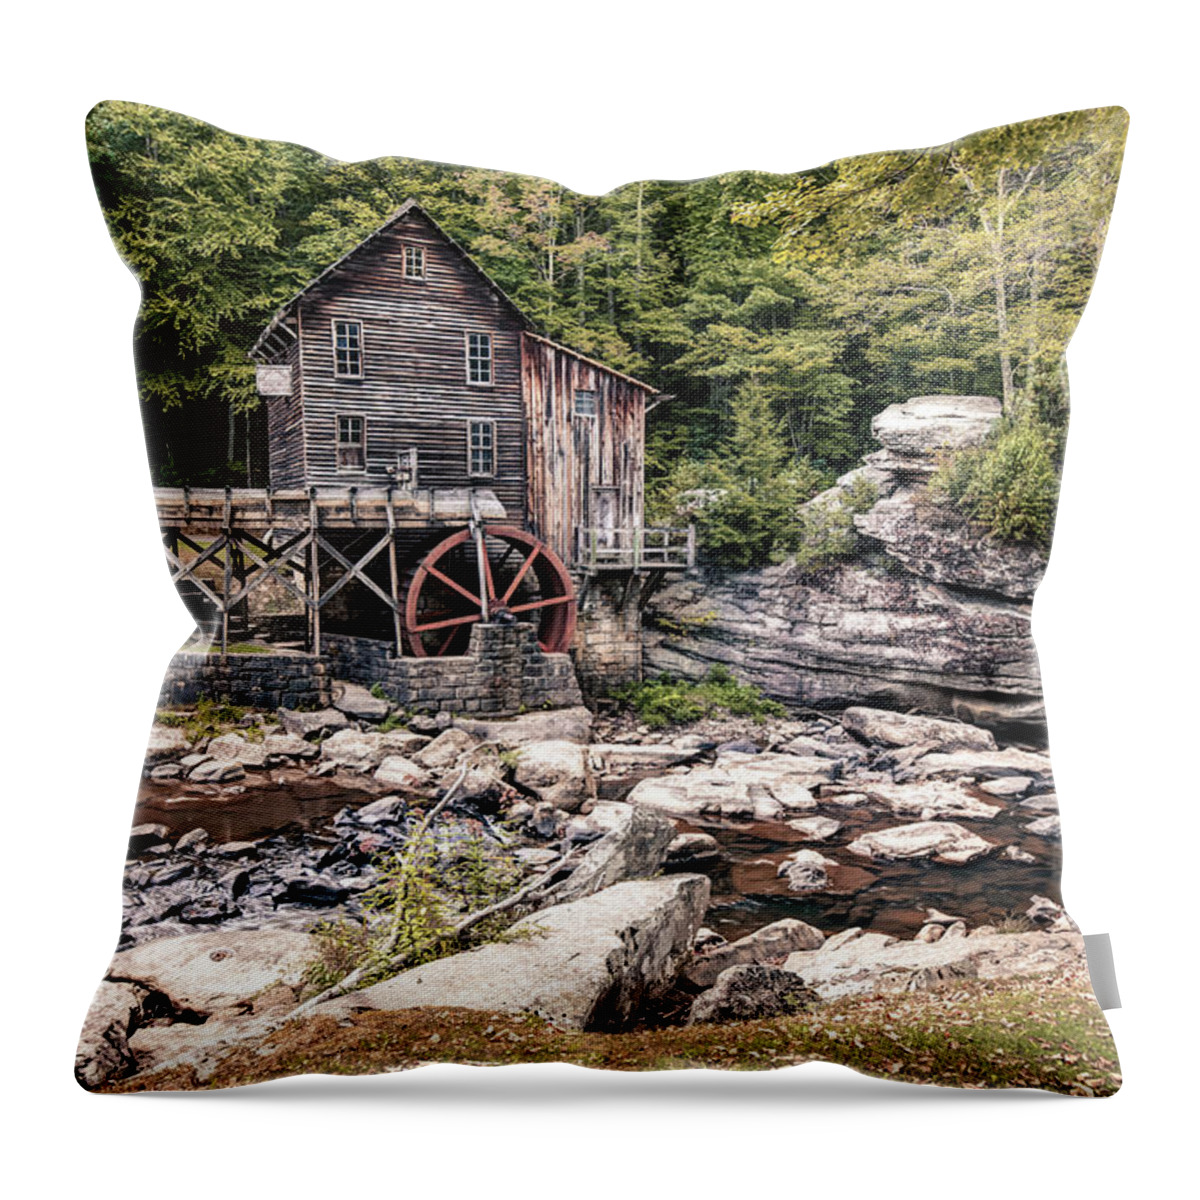 America Throw Pillow featuring the photograph Glade Creek Mill Landscape - West Virginia by Gregory Ballos